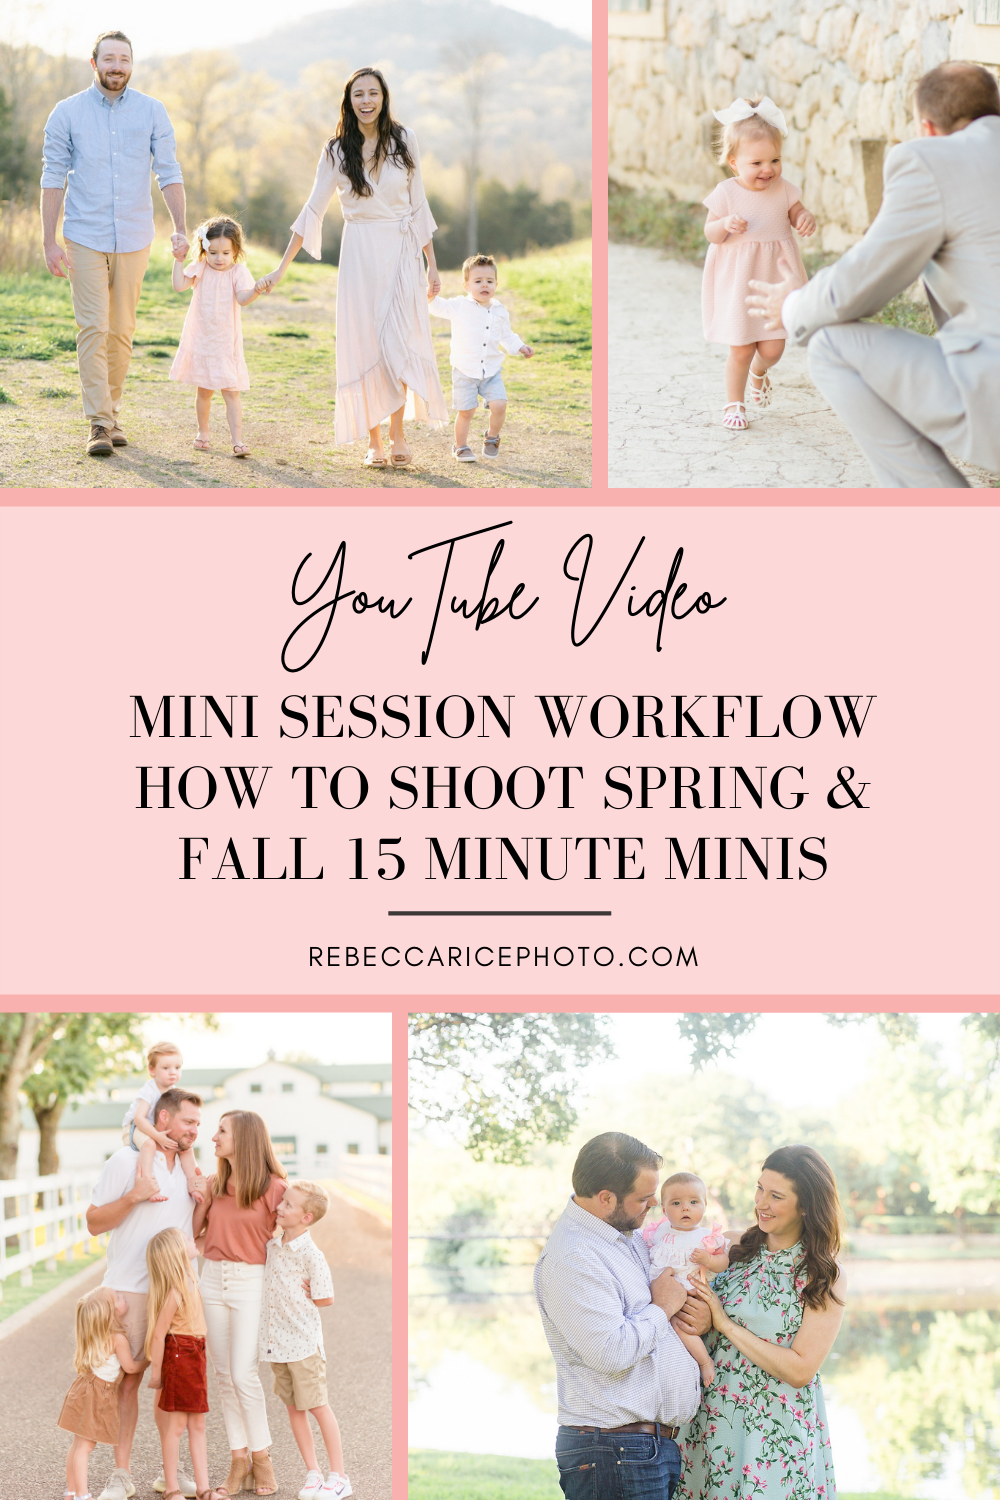 Mini Session Workflow: How to Shoot Spring & Fall 15 Minute Minis